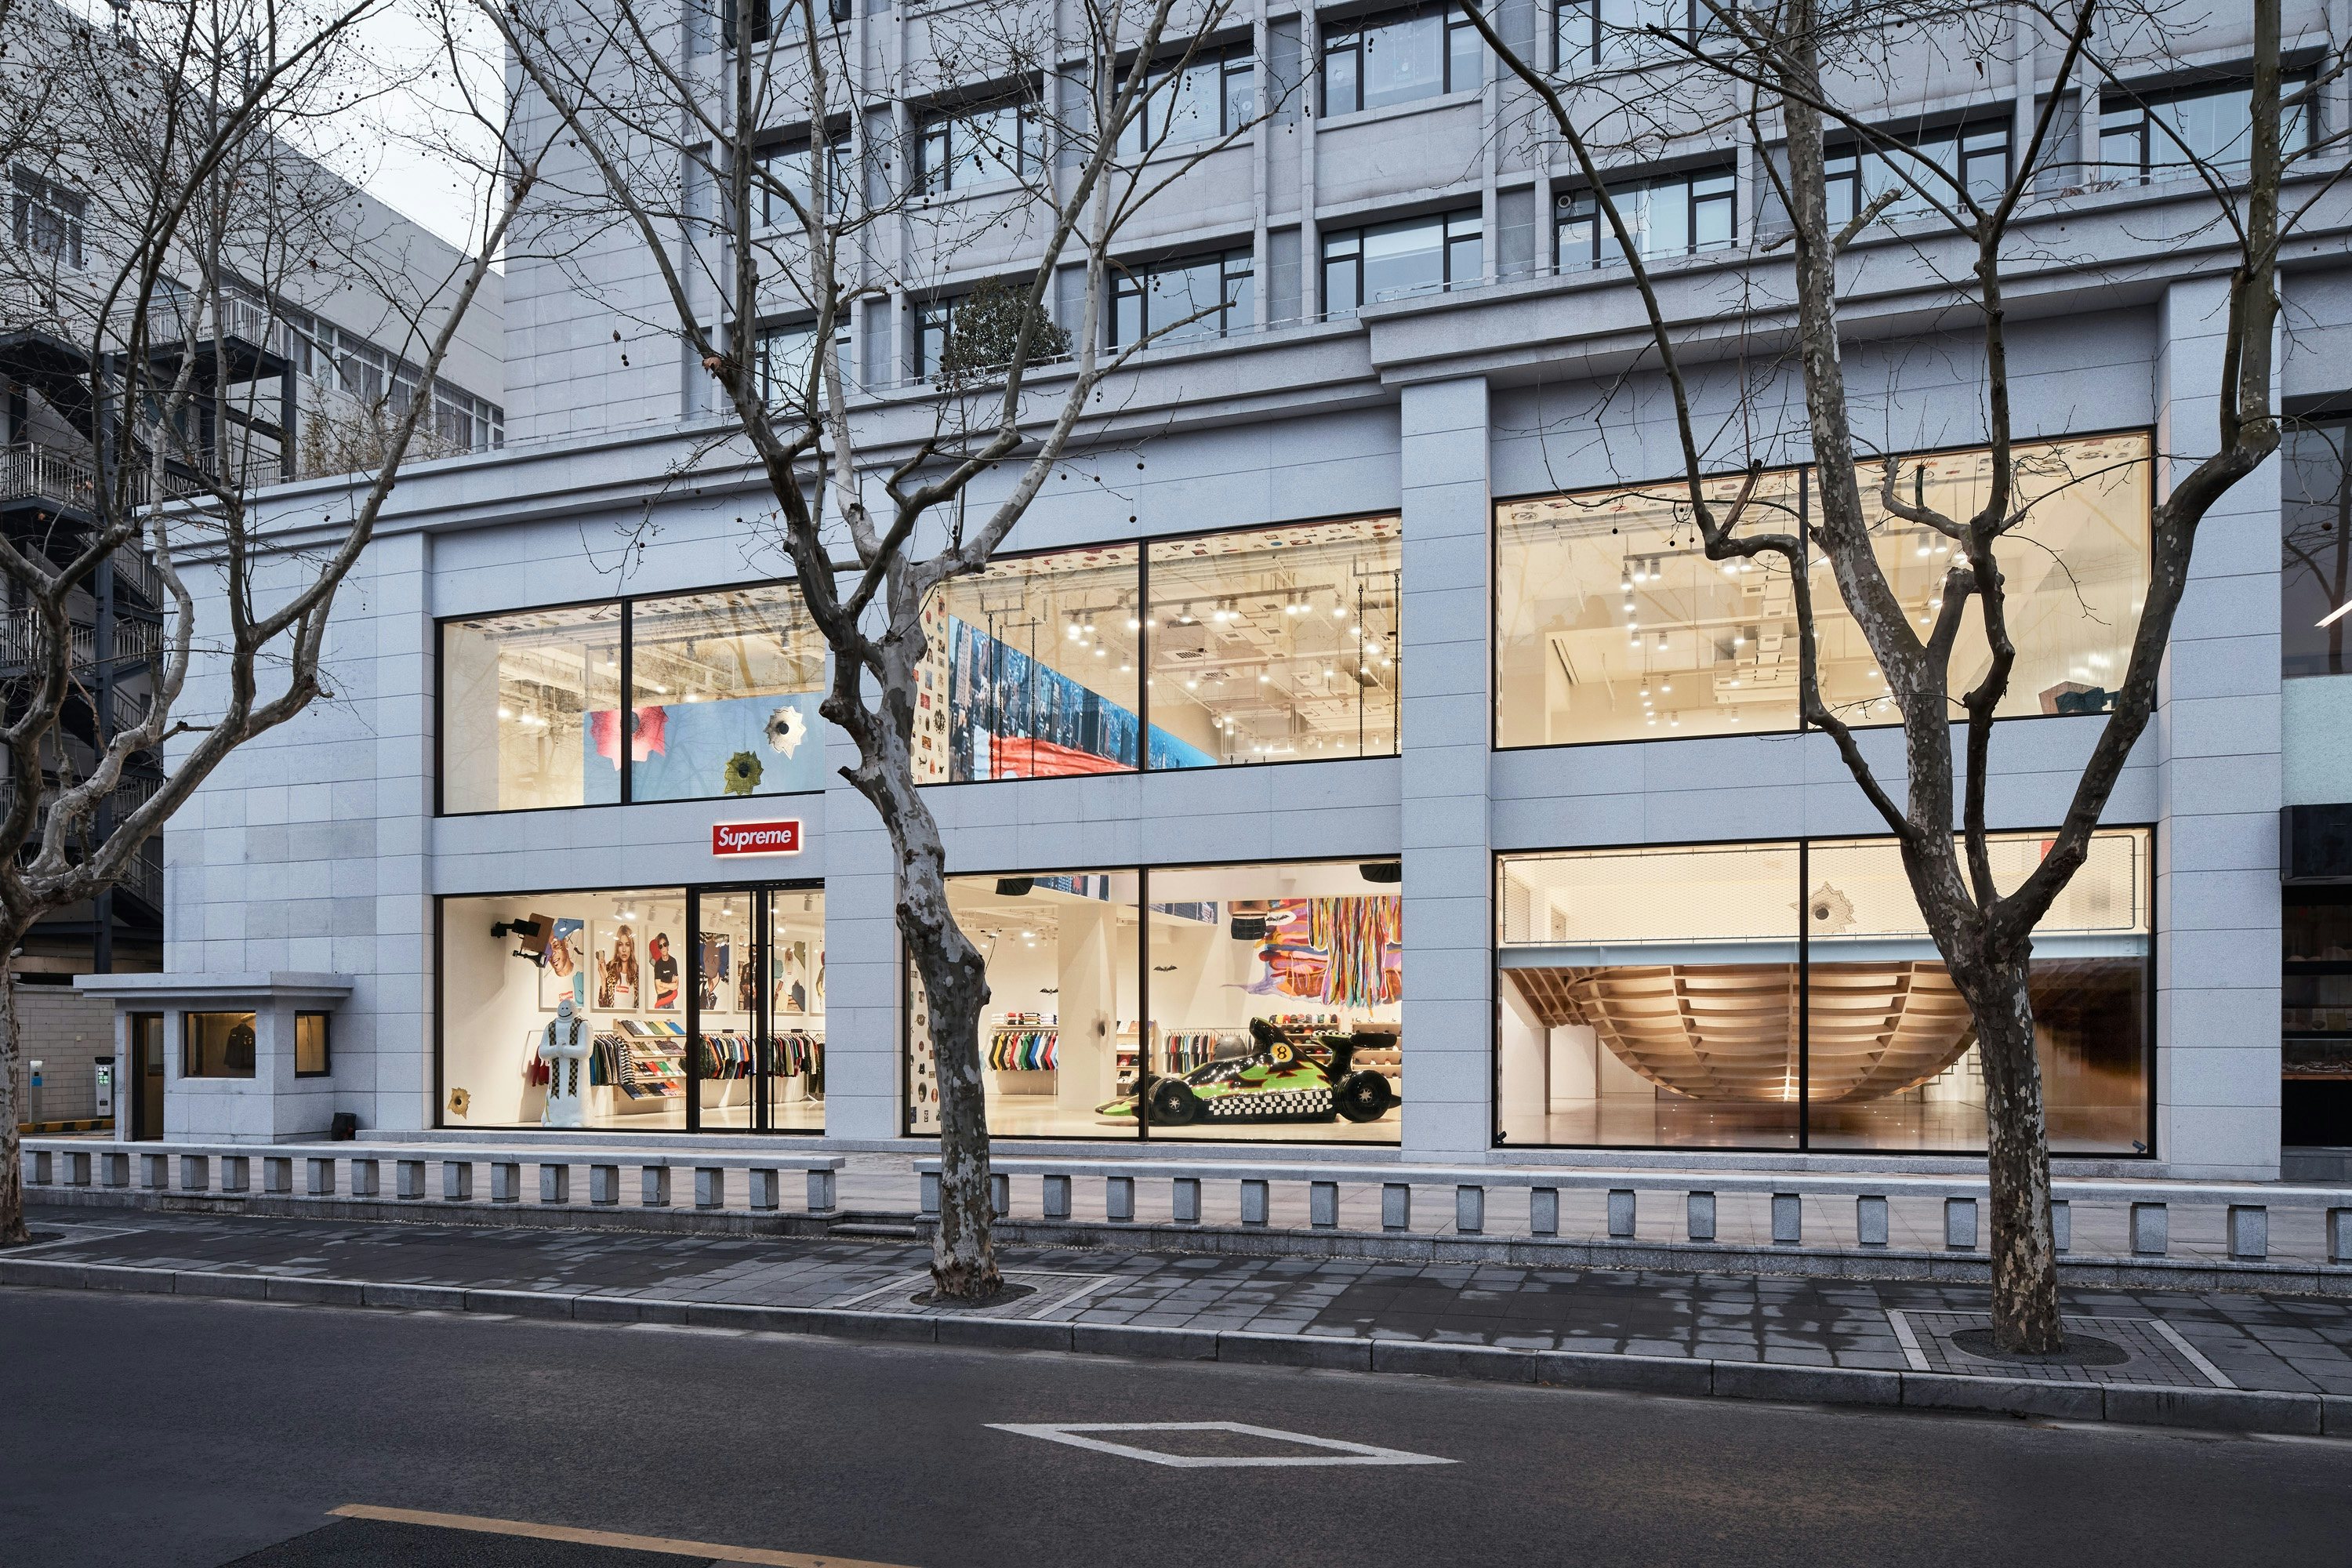 The Shanghai brick-and-mortar store's location is 291 Fumin Road, in the city's designer district. Photo: Supreme